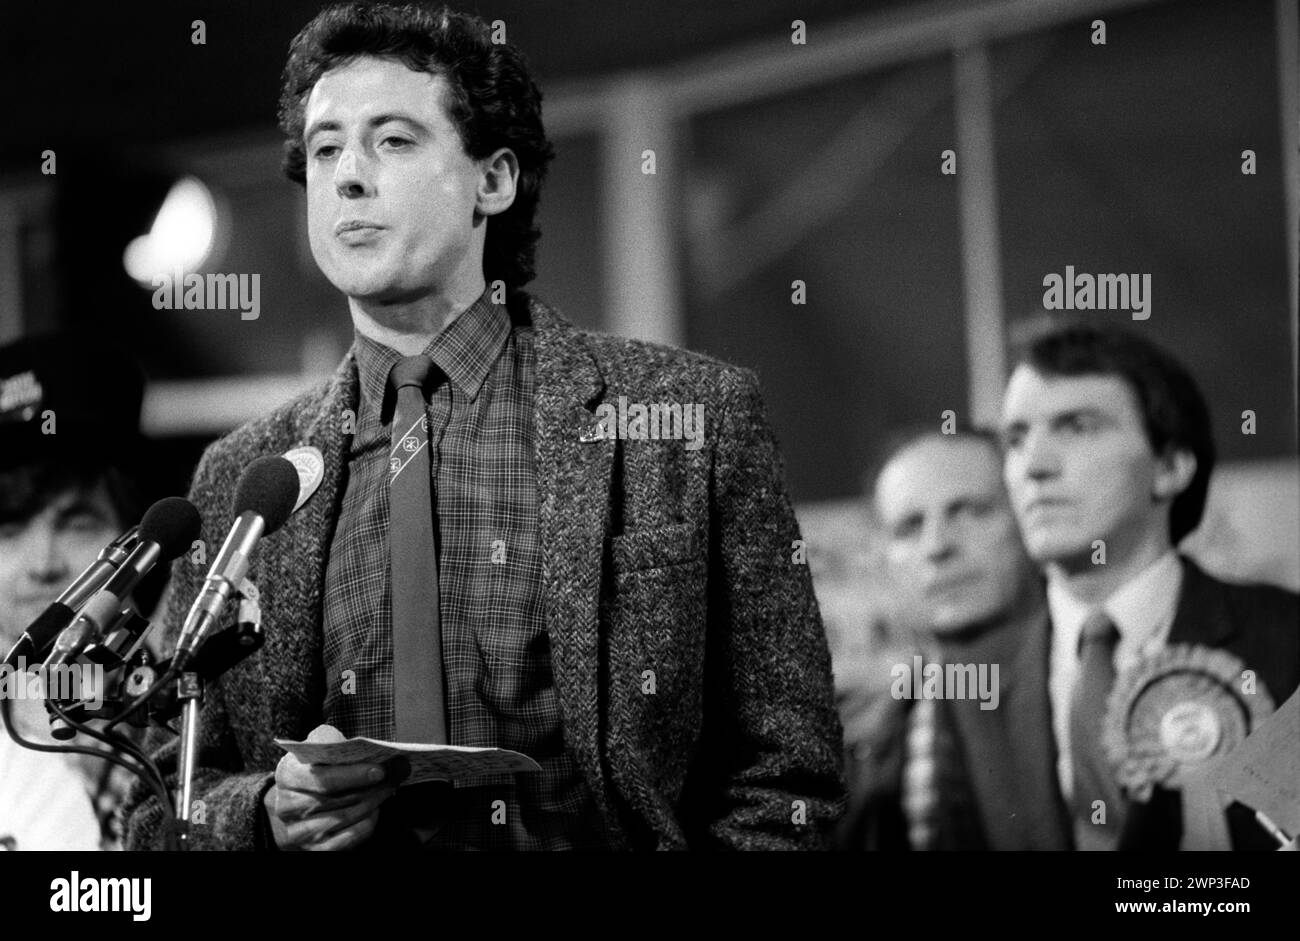 London, England 24th February 1983.  Peter Tatchell the Gay Rights campaigner seeks to be elected at the Bermondsey by election South London to the Labour party as a MP.  Election night debate with Simon Hughes MP. (background) 1980s HOMER SYKES Stock Photo